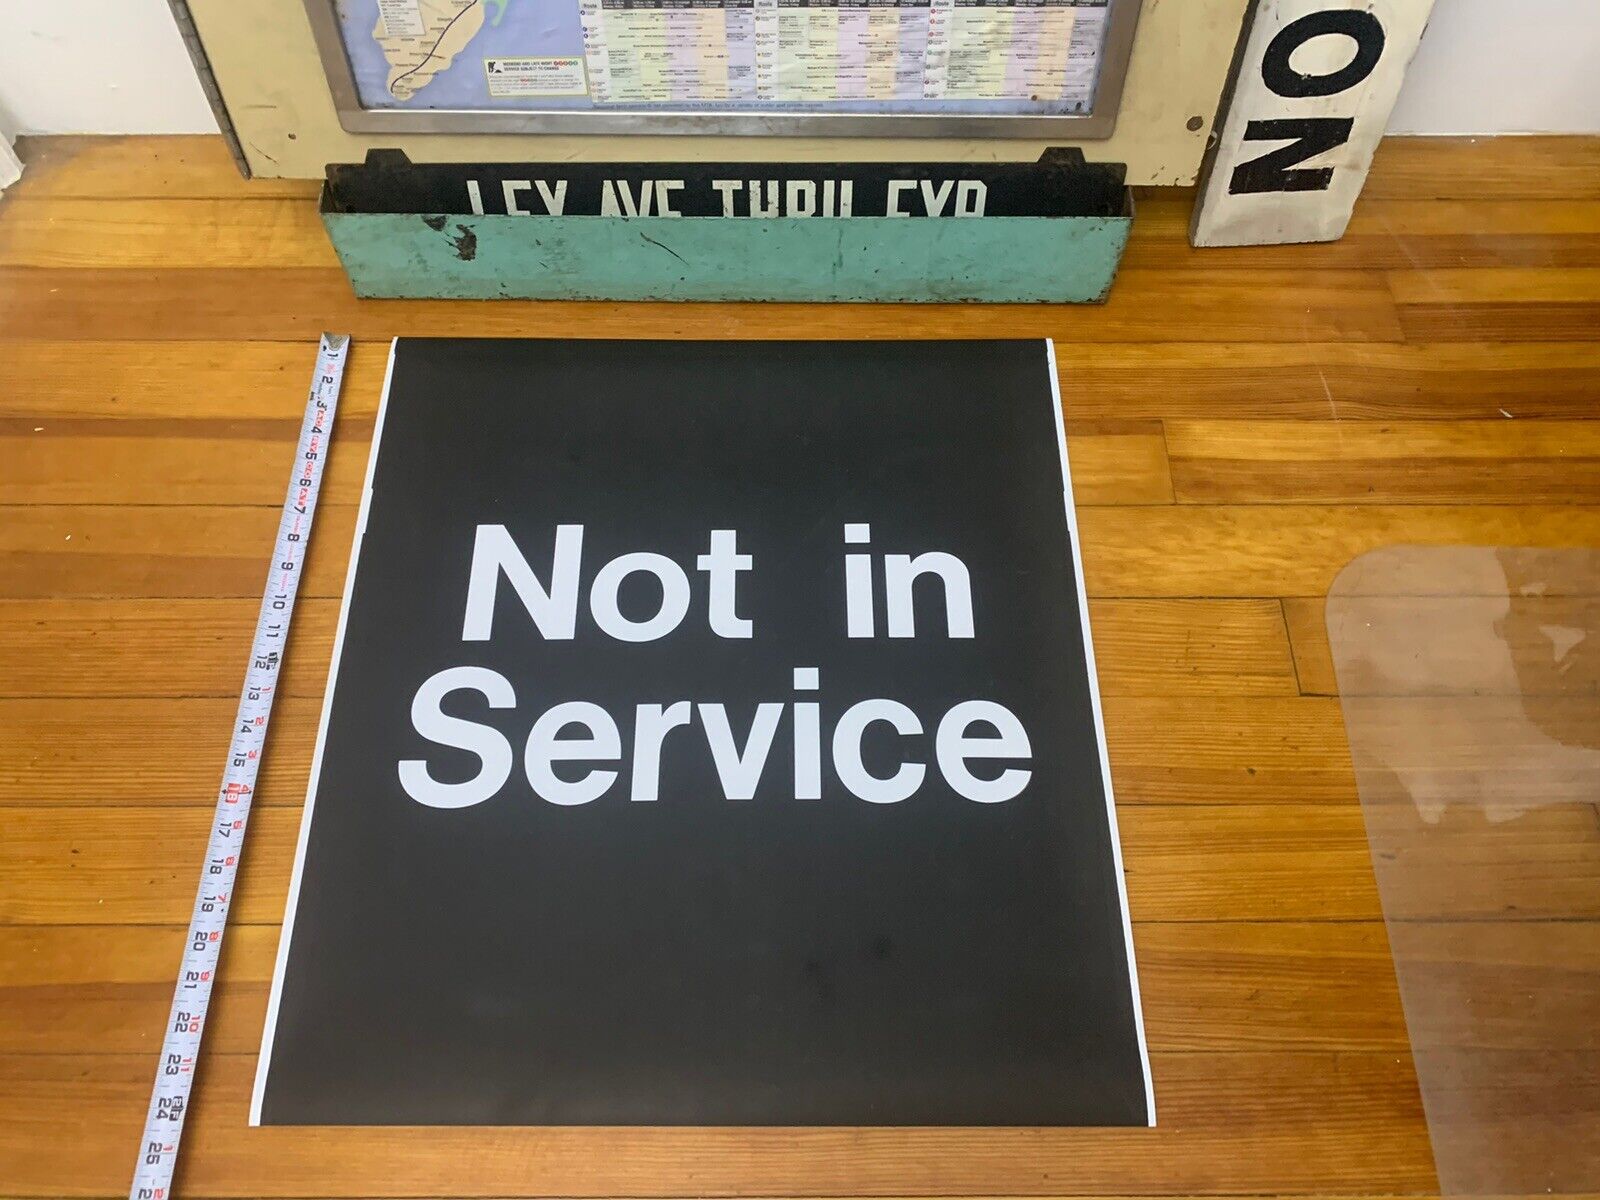 LARGE 24X22 NY NYC SUBWAY ROLL SIGN NOT IN SERVICE SPECIAL SHUTTLE URBAN TRANSIT